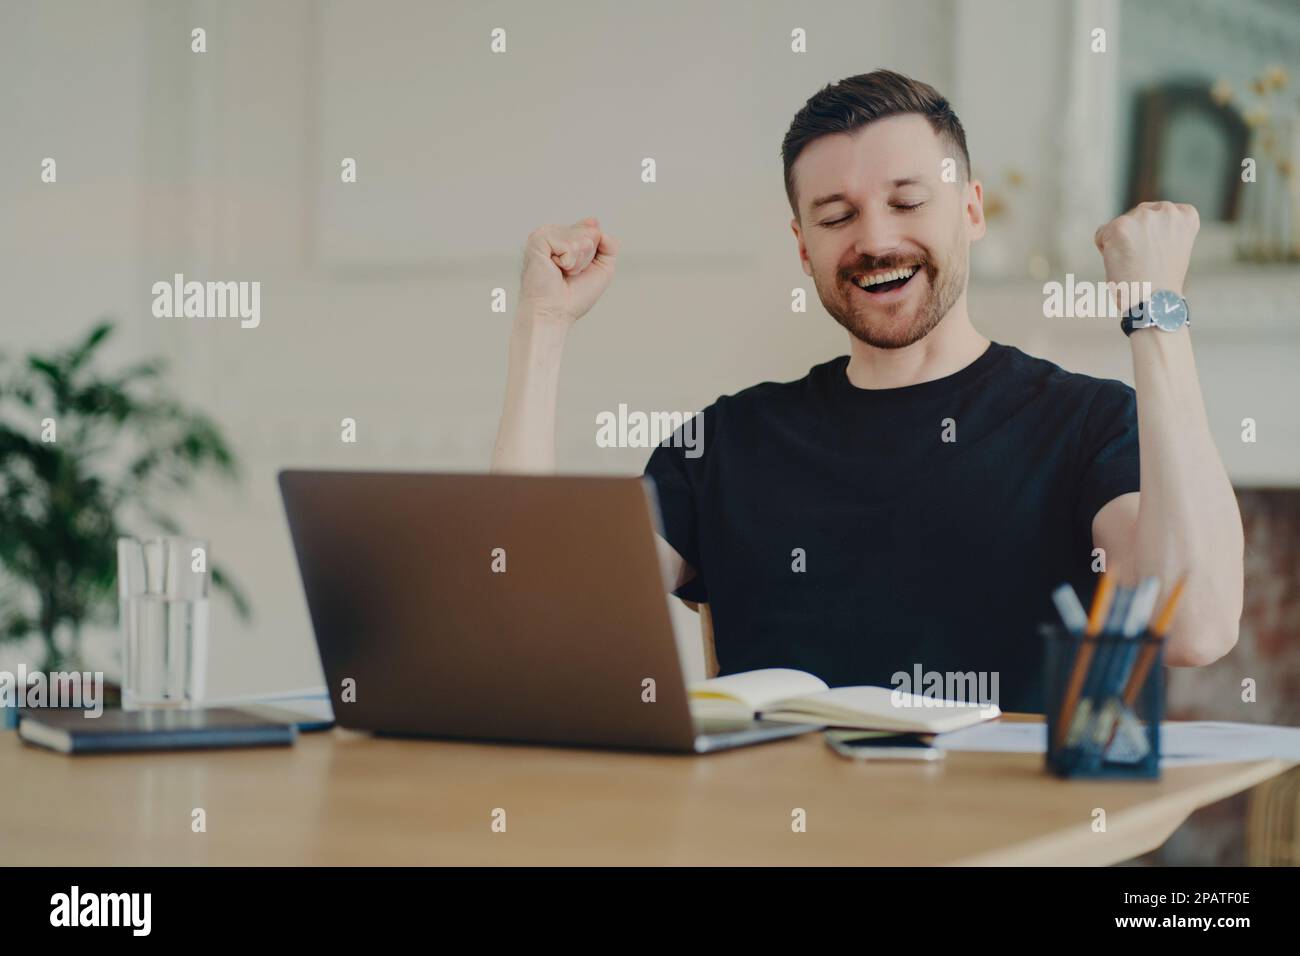 Excited cheerful bearded man with joyful expression clenches fists celebrates success dressed casually poses at desktop in front of opened laptop sati Stock Photo